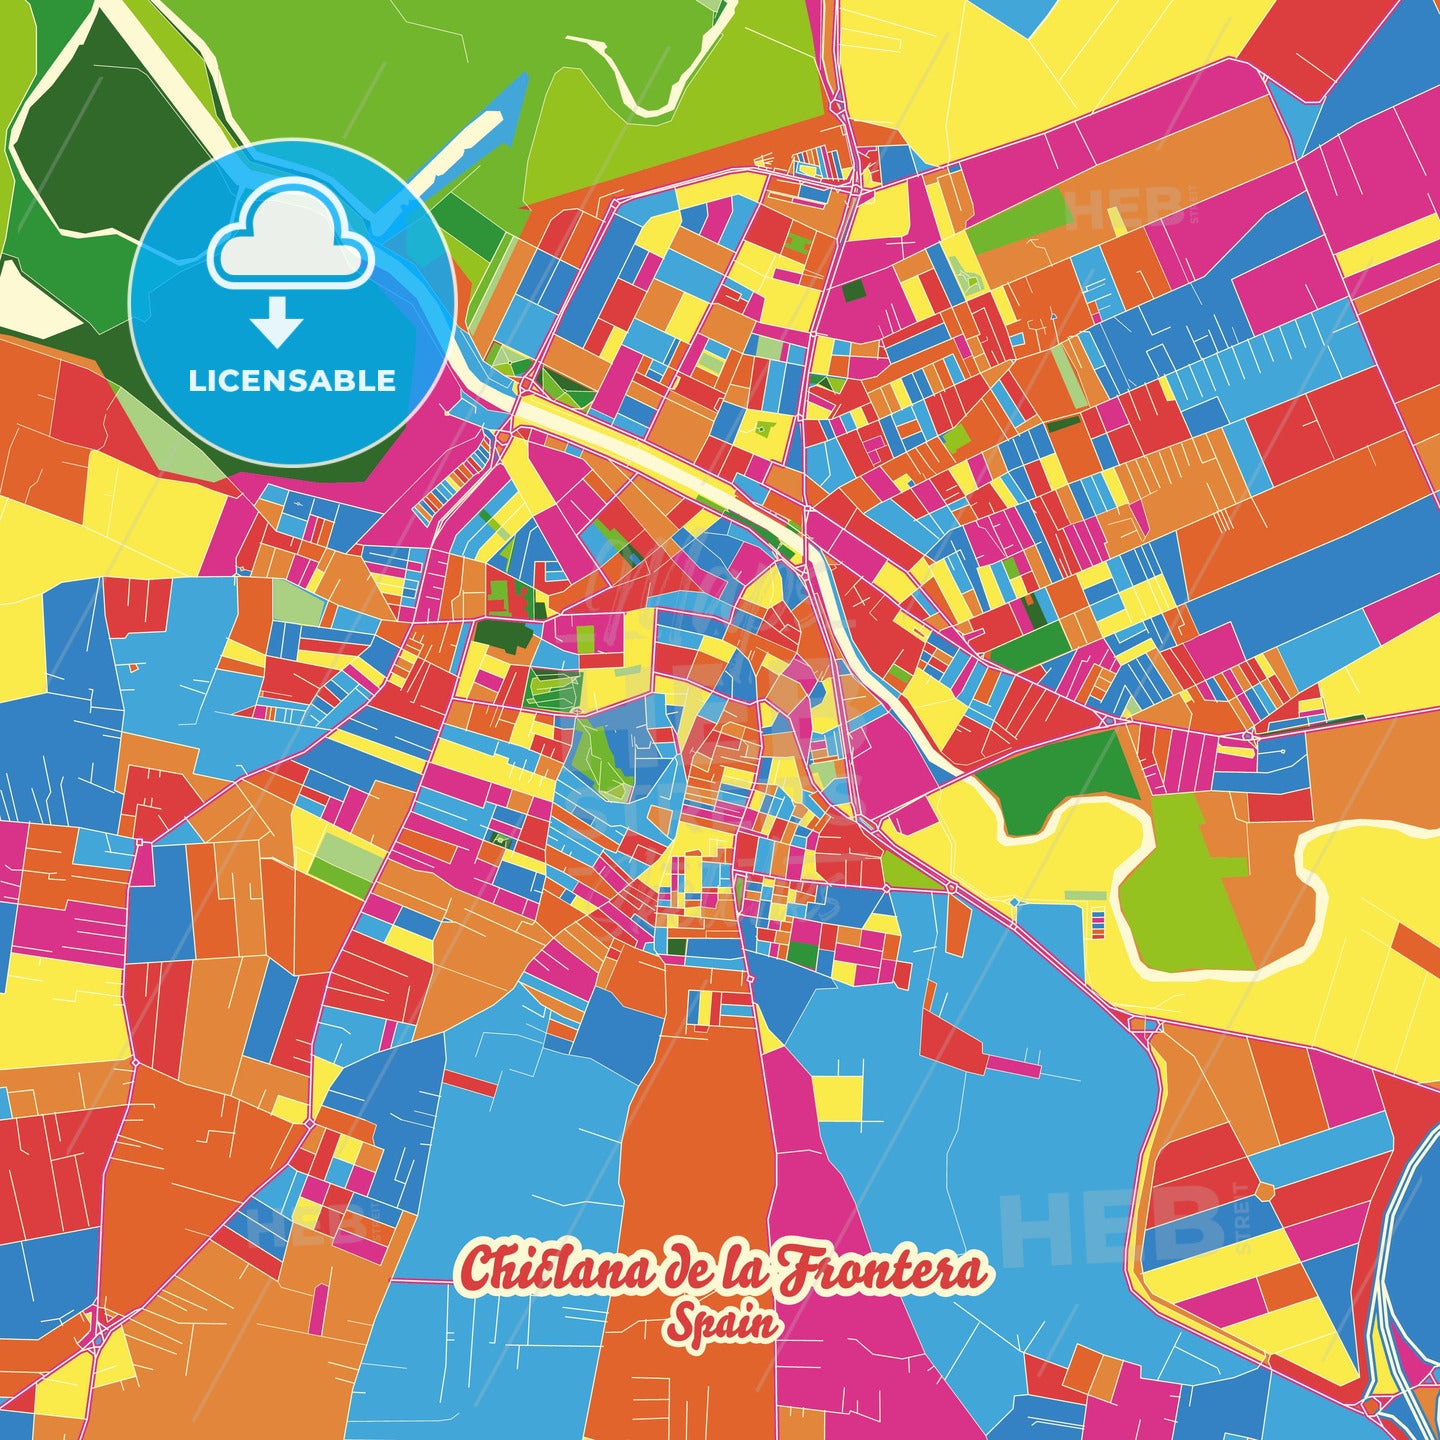 Chiclana de la Frontera, Spain Crazy Colorful Street Map Poster Template - HEBSTREITS Sketches